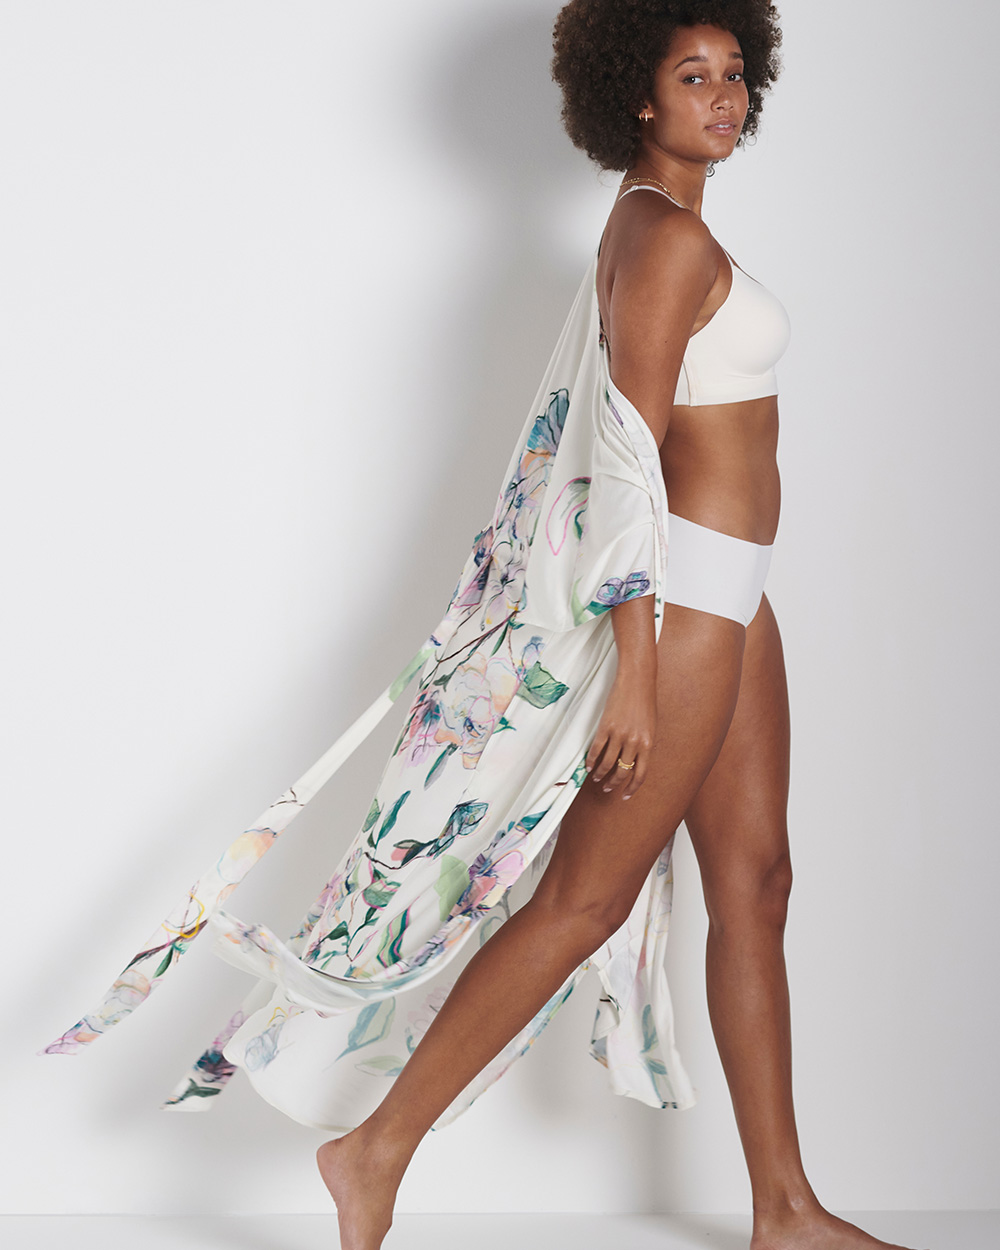 Soma<sup class=st-superscript>®</sup> model wearing a white bra and panties, and a long floral robe.